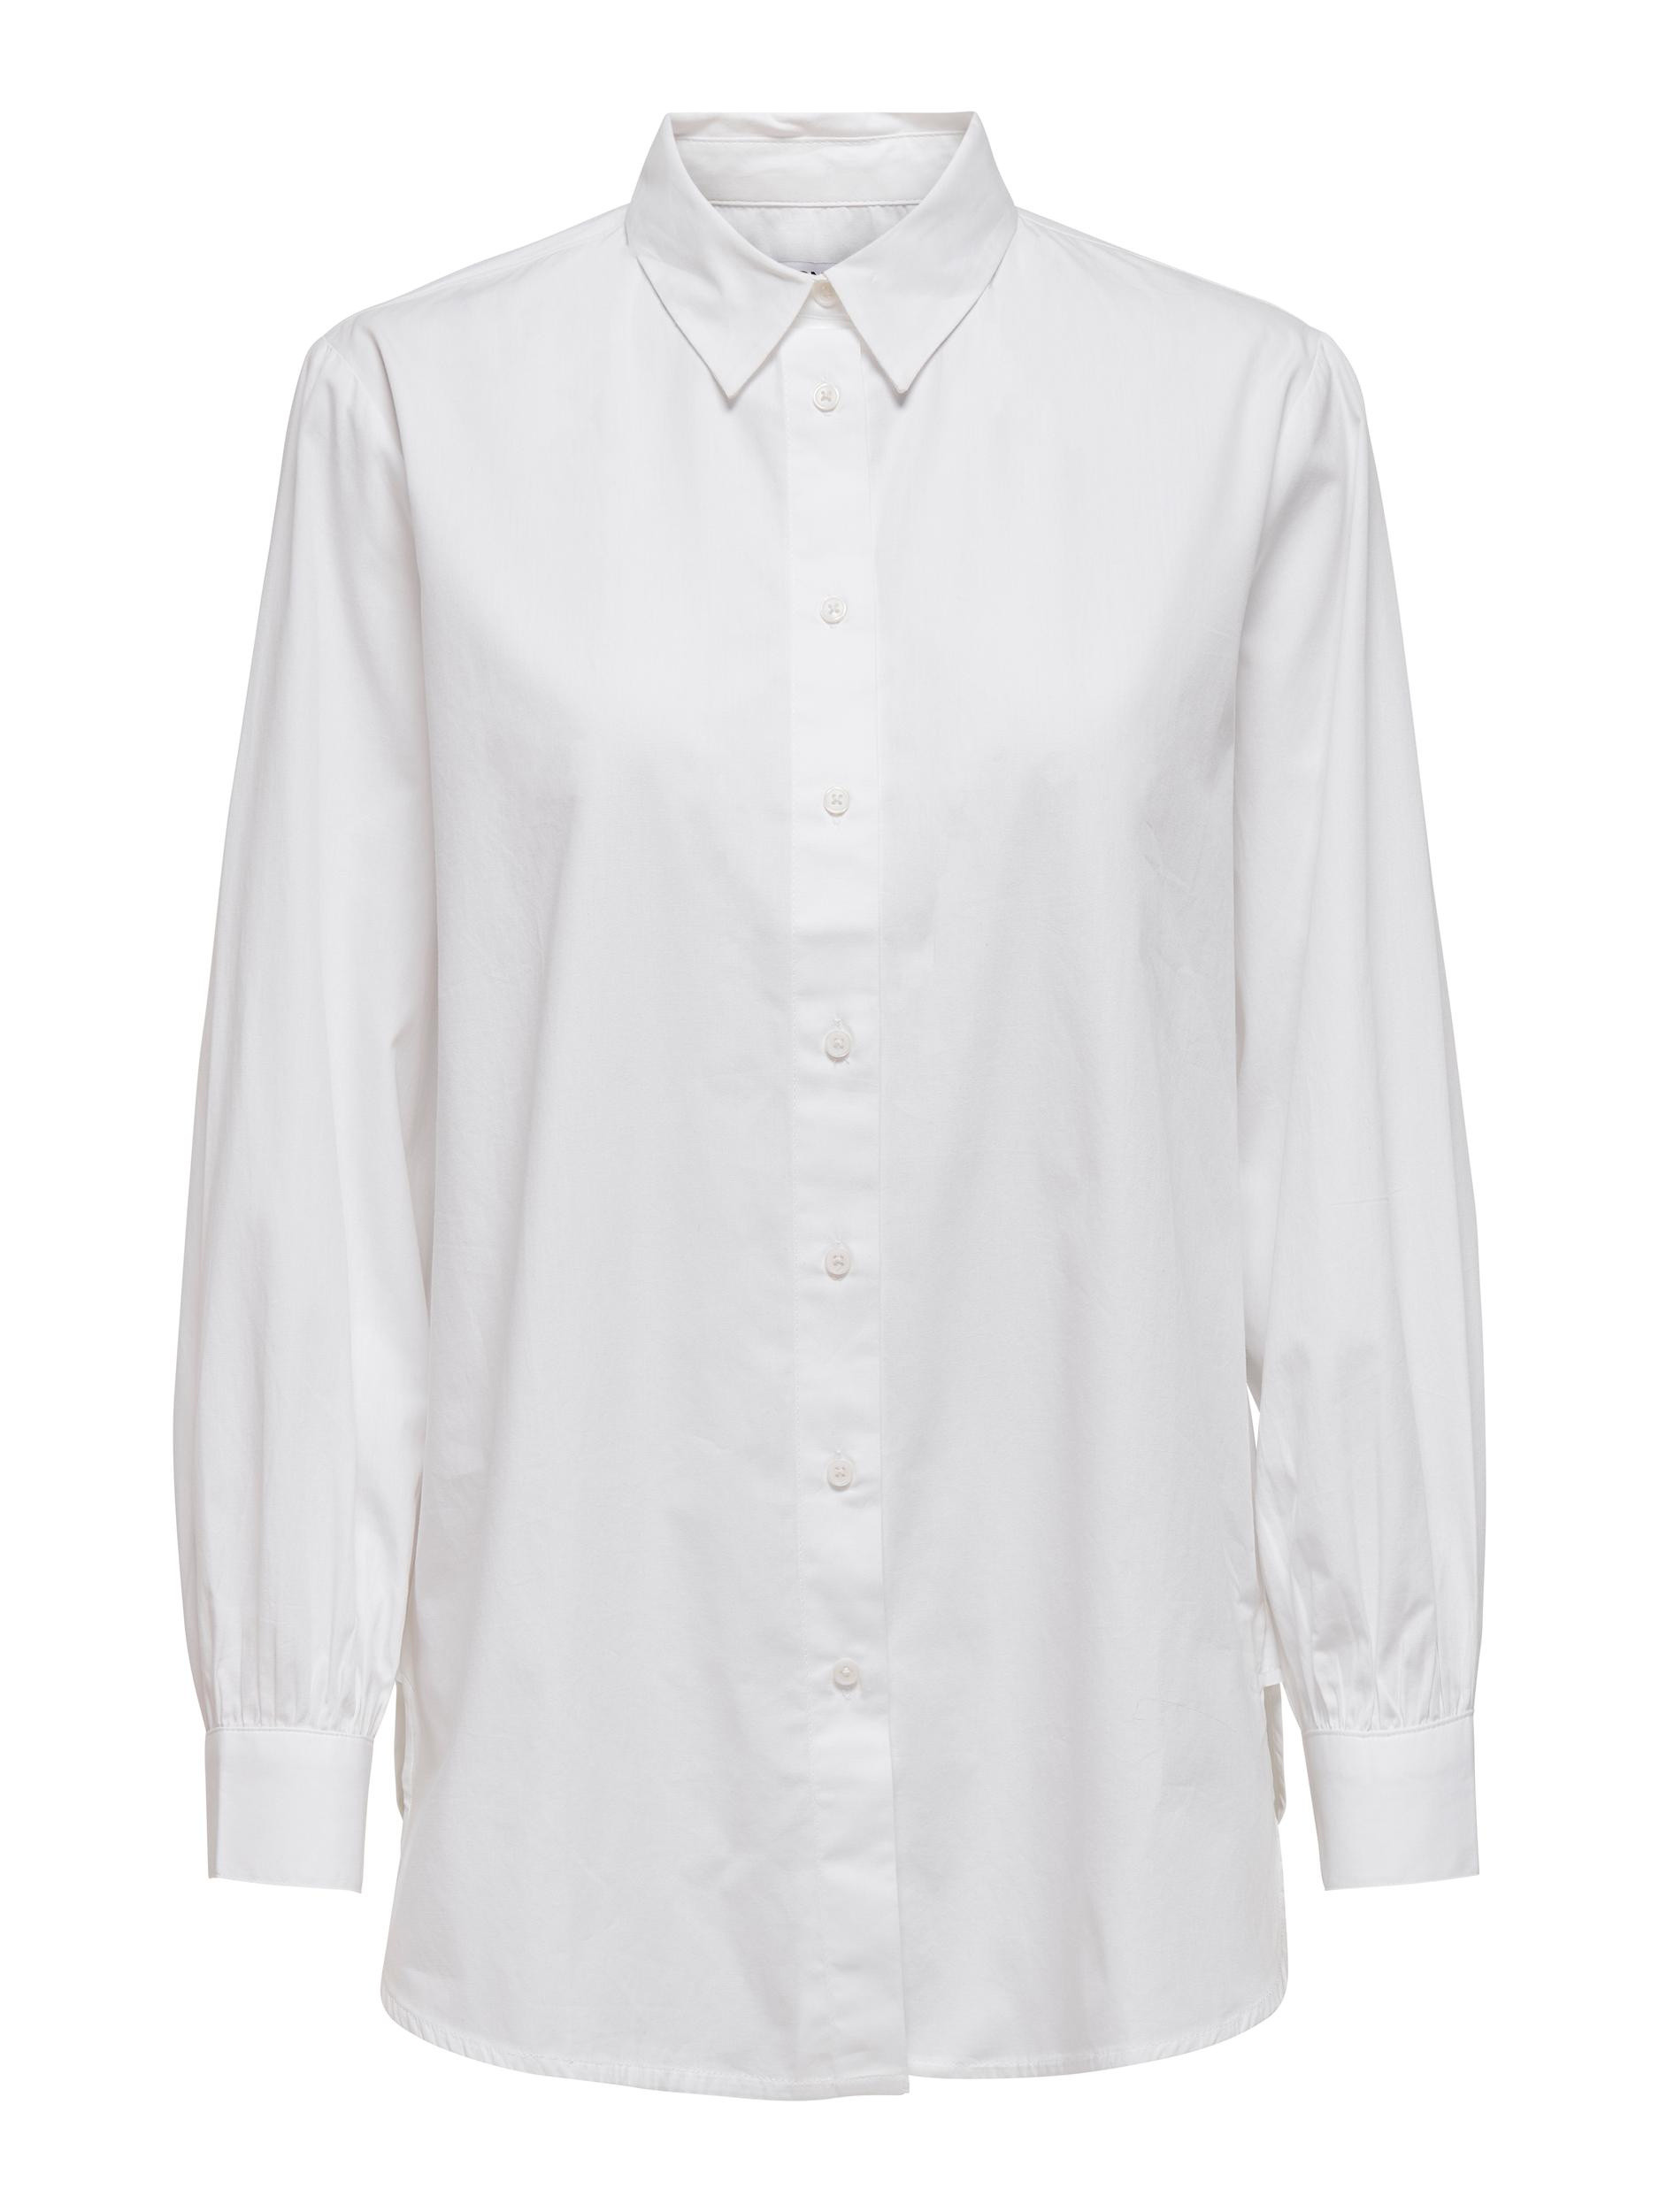 shirt with long sleeved, White, large image number 0